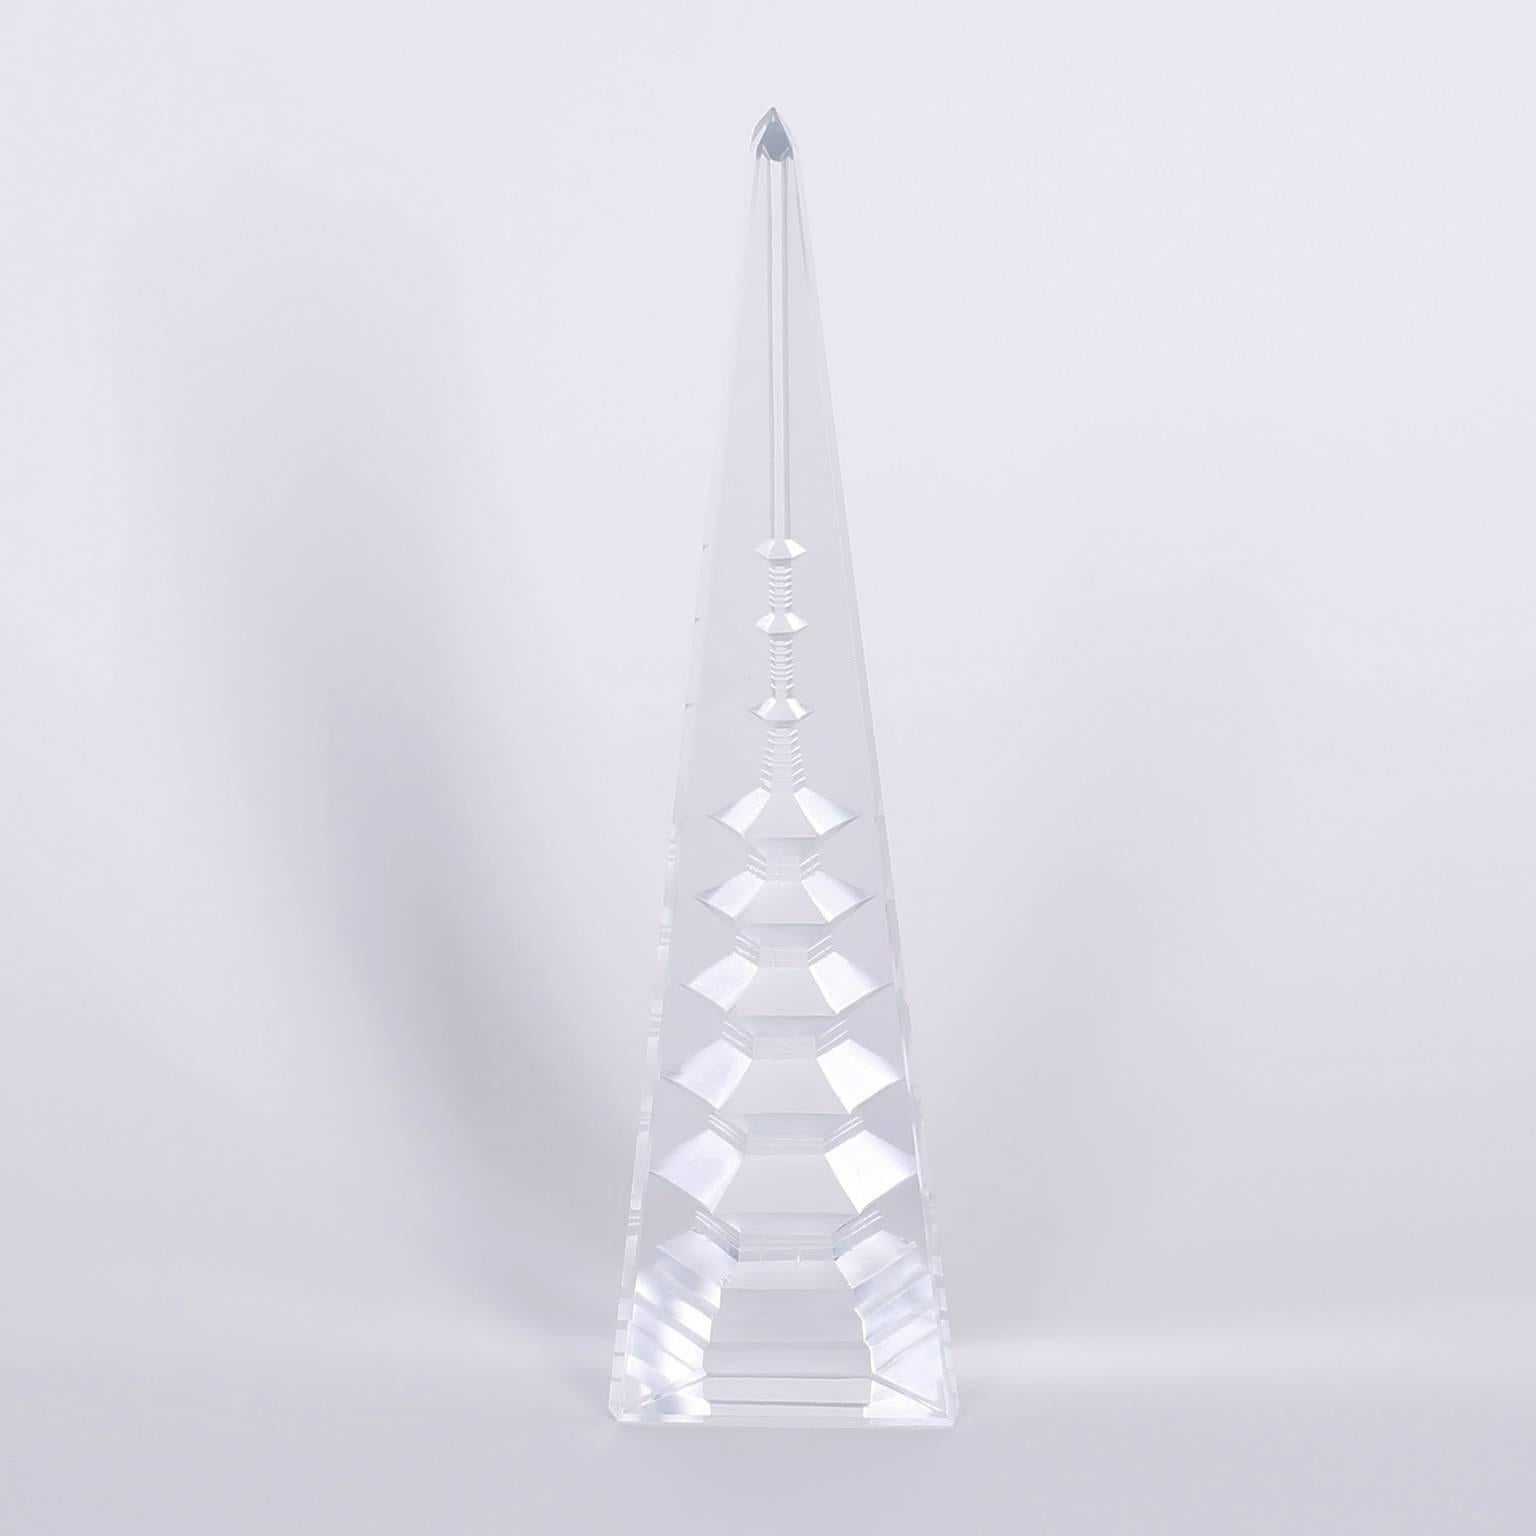 Here are three cut crystal obelisks with the unexpected pagodas appearing inside. By cutting stylized geometrics into the back the results in the fronts are truly magic.
 